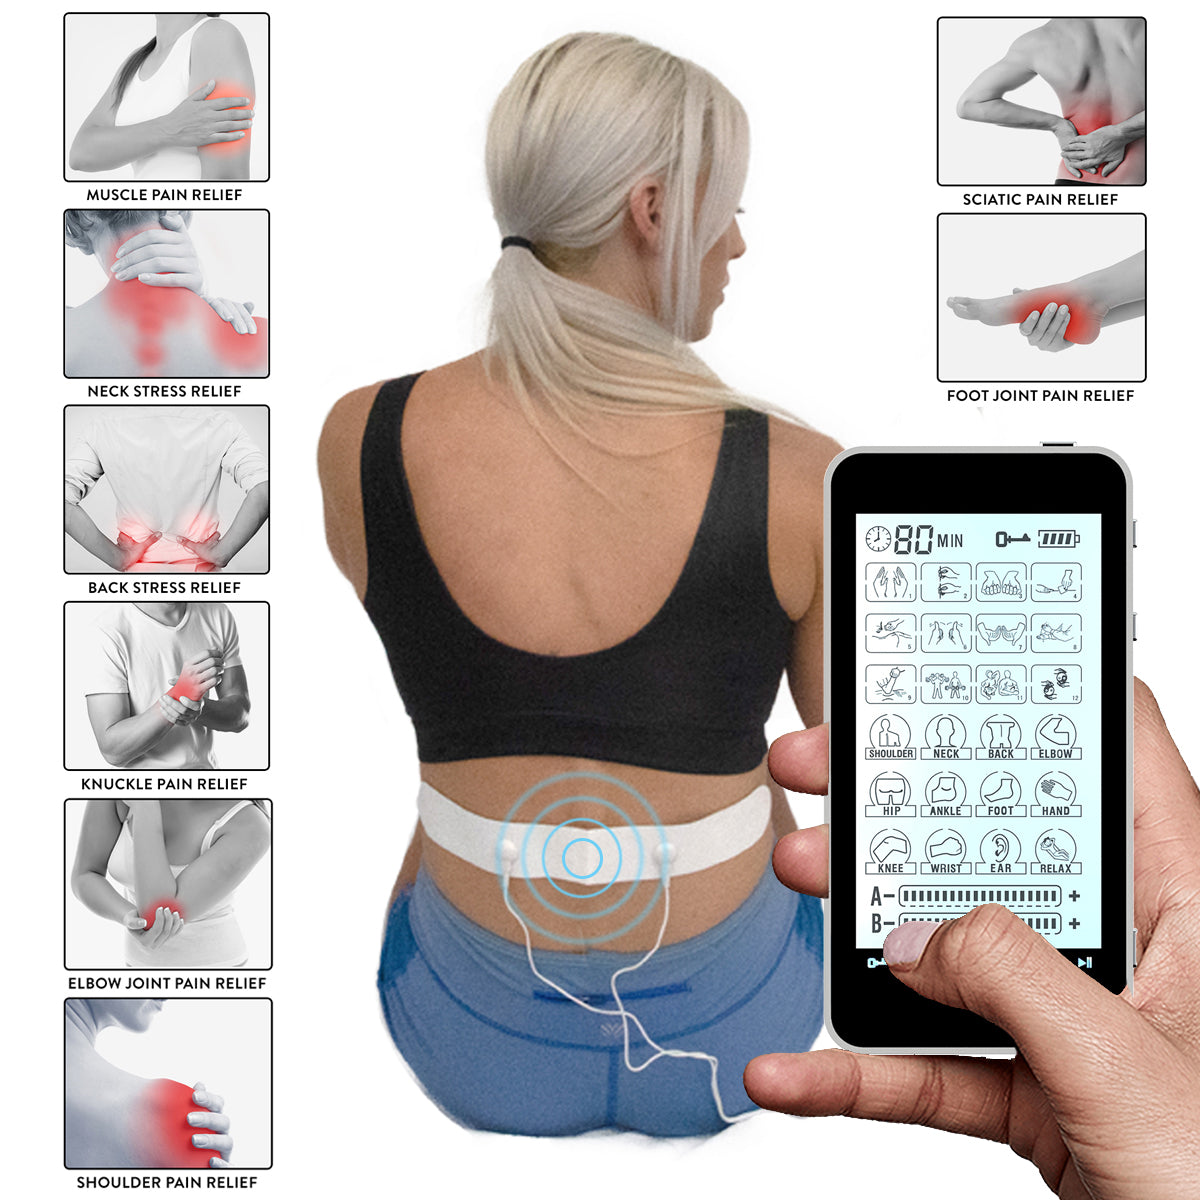 Introducing Smart Wearable Pain-Relief Device: TENS 2.0